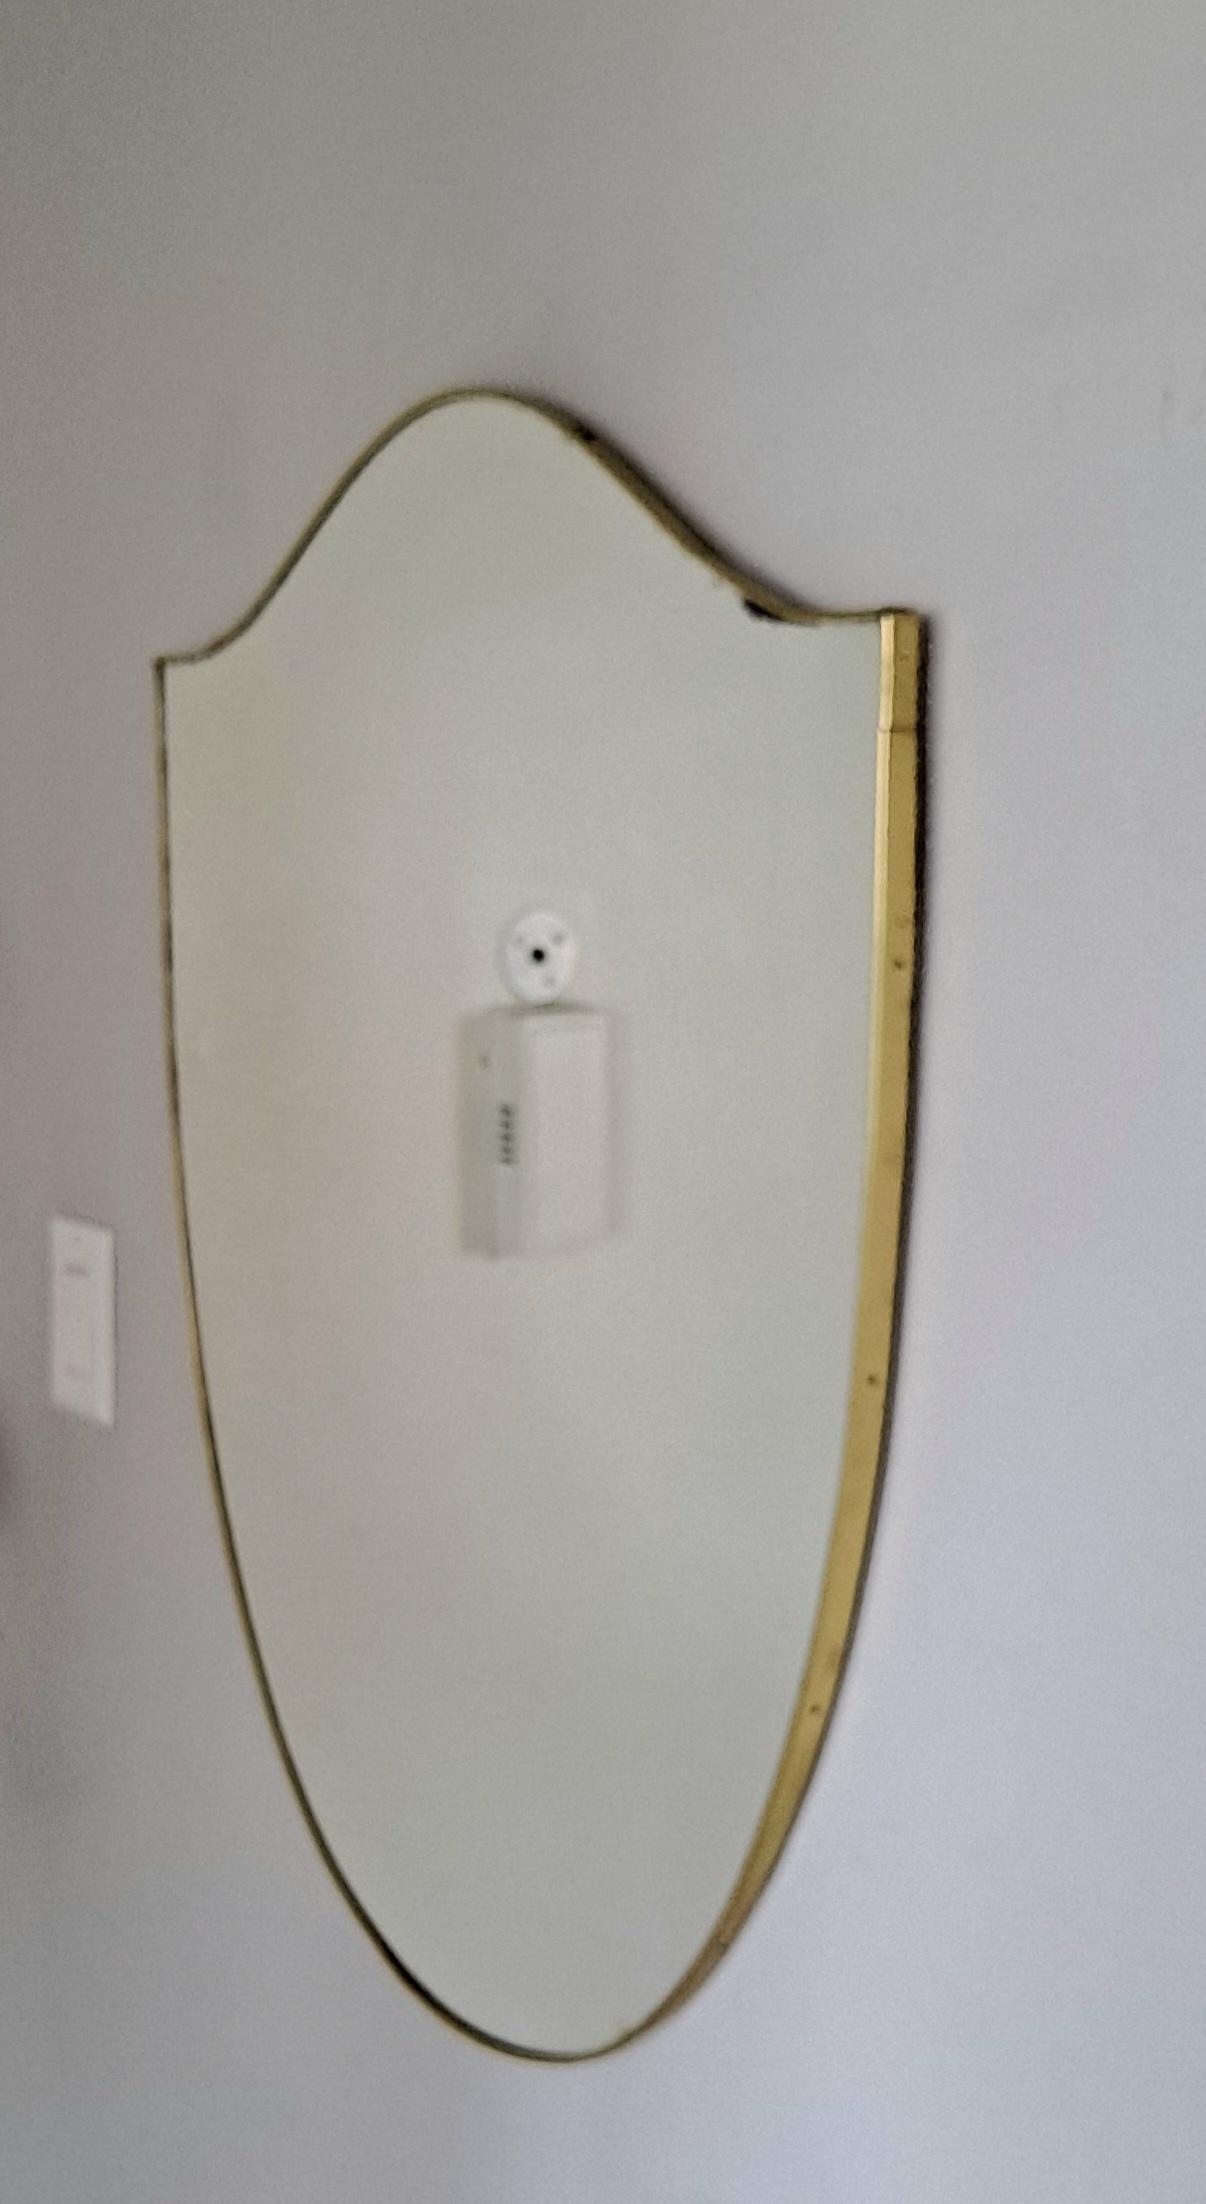 Mid century wall mirror frame and the mirror from the 1950 s period.